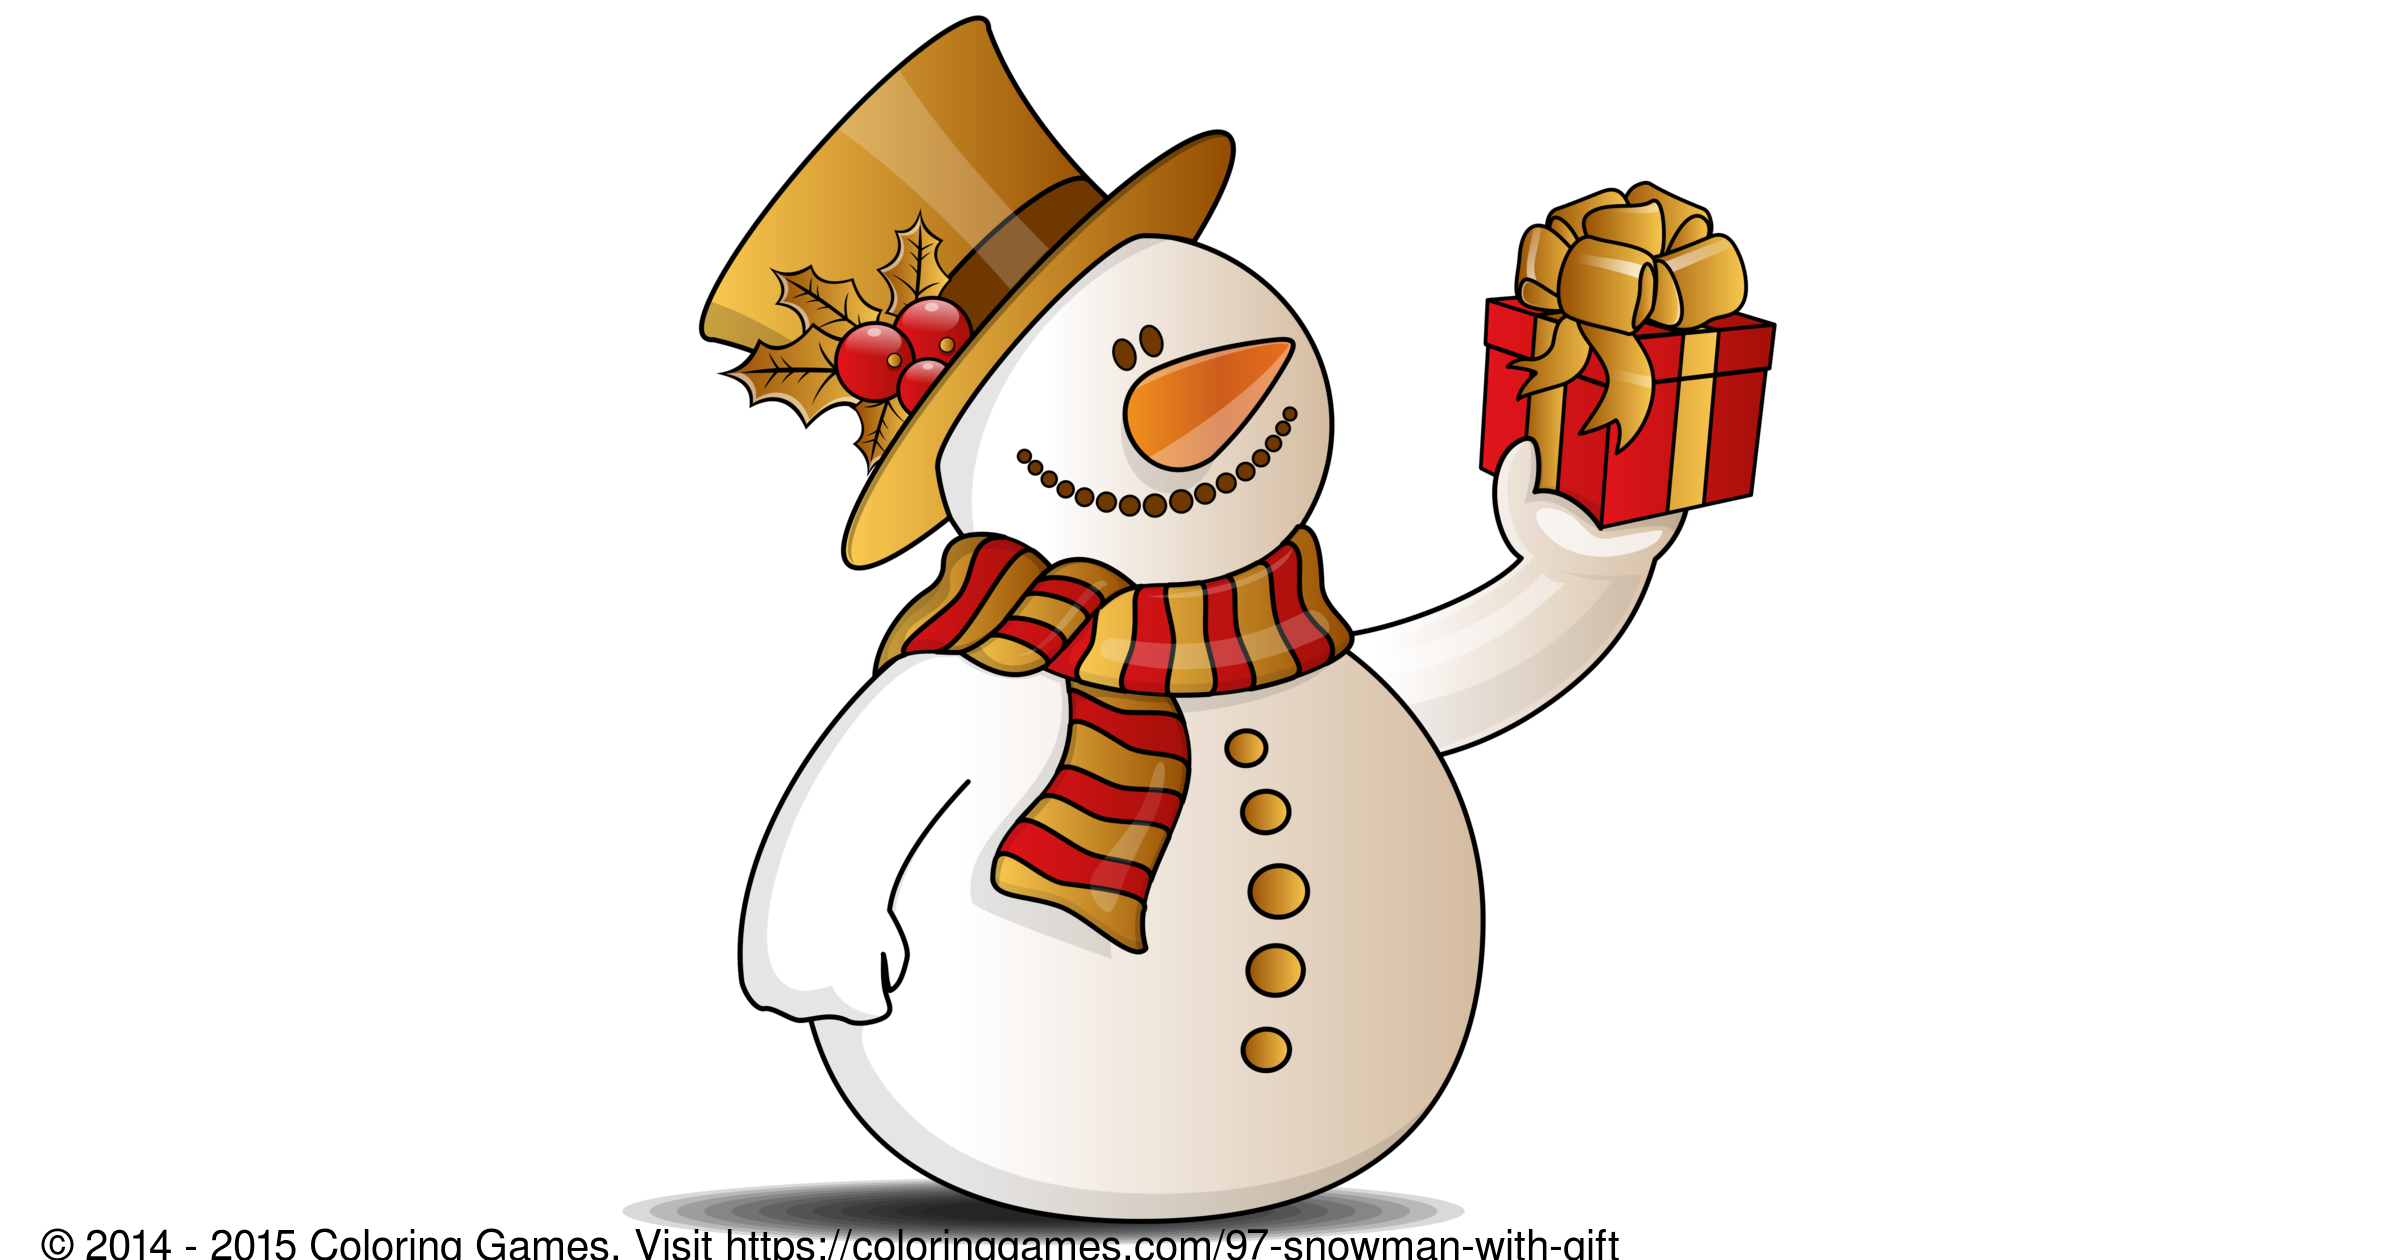 Snowman with gift - Coloring Games and Coloring Pages